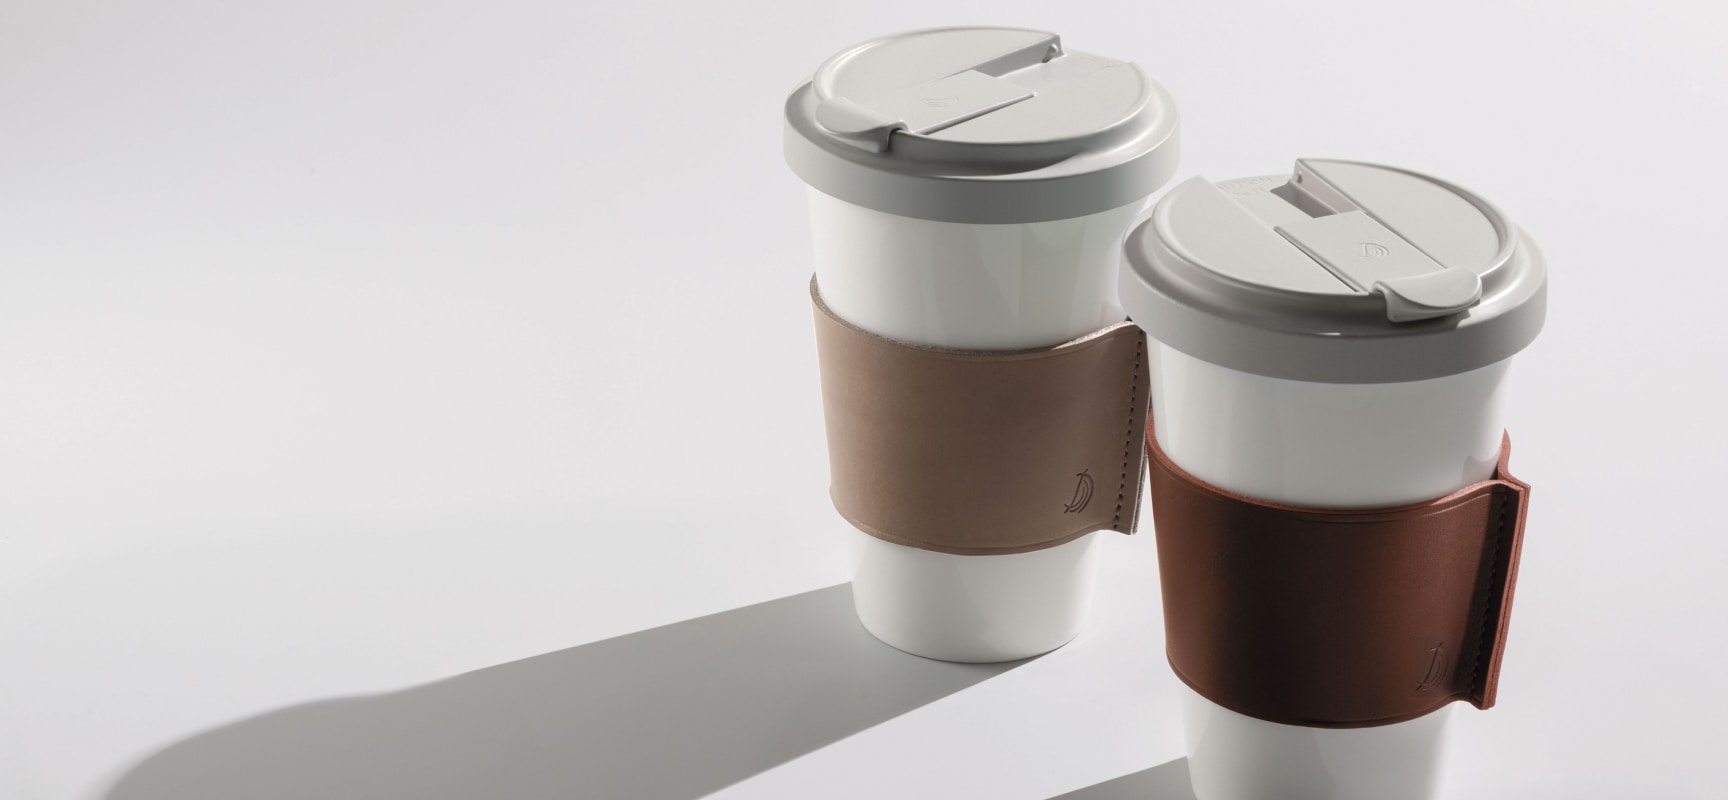 COFFEE-TO-GO CUPS